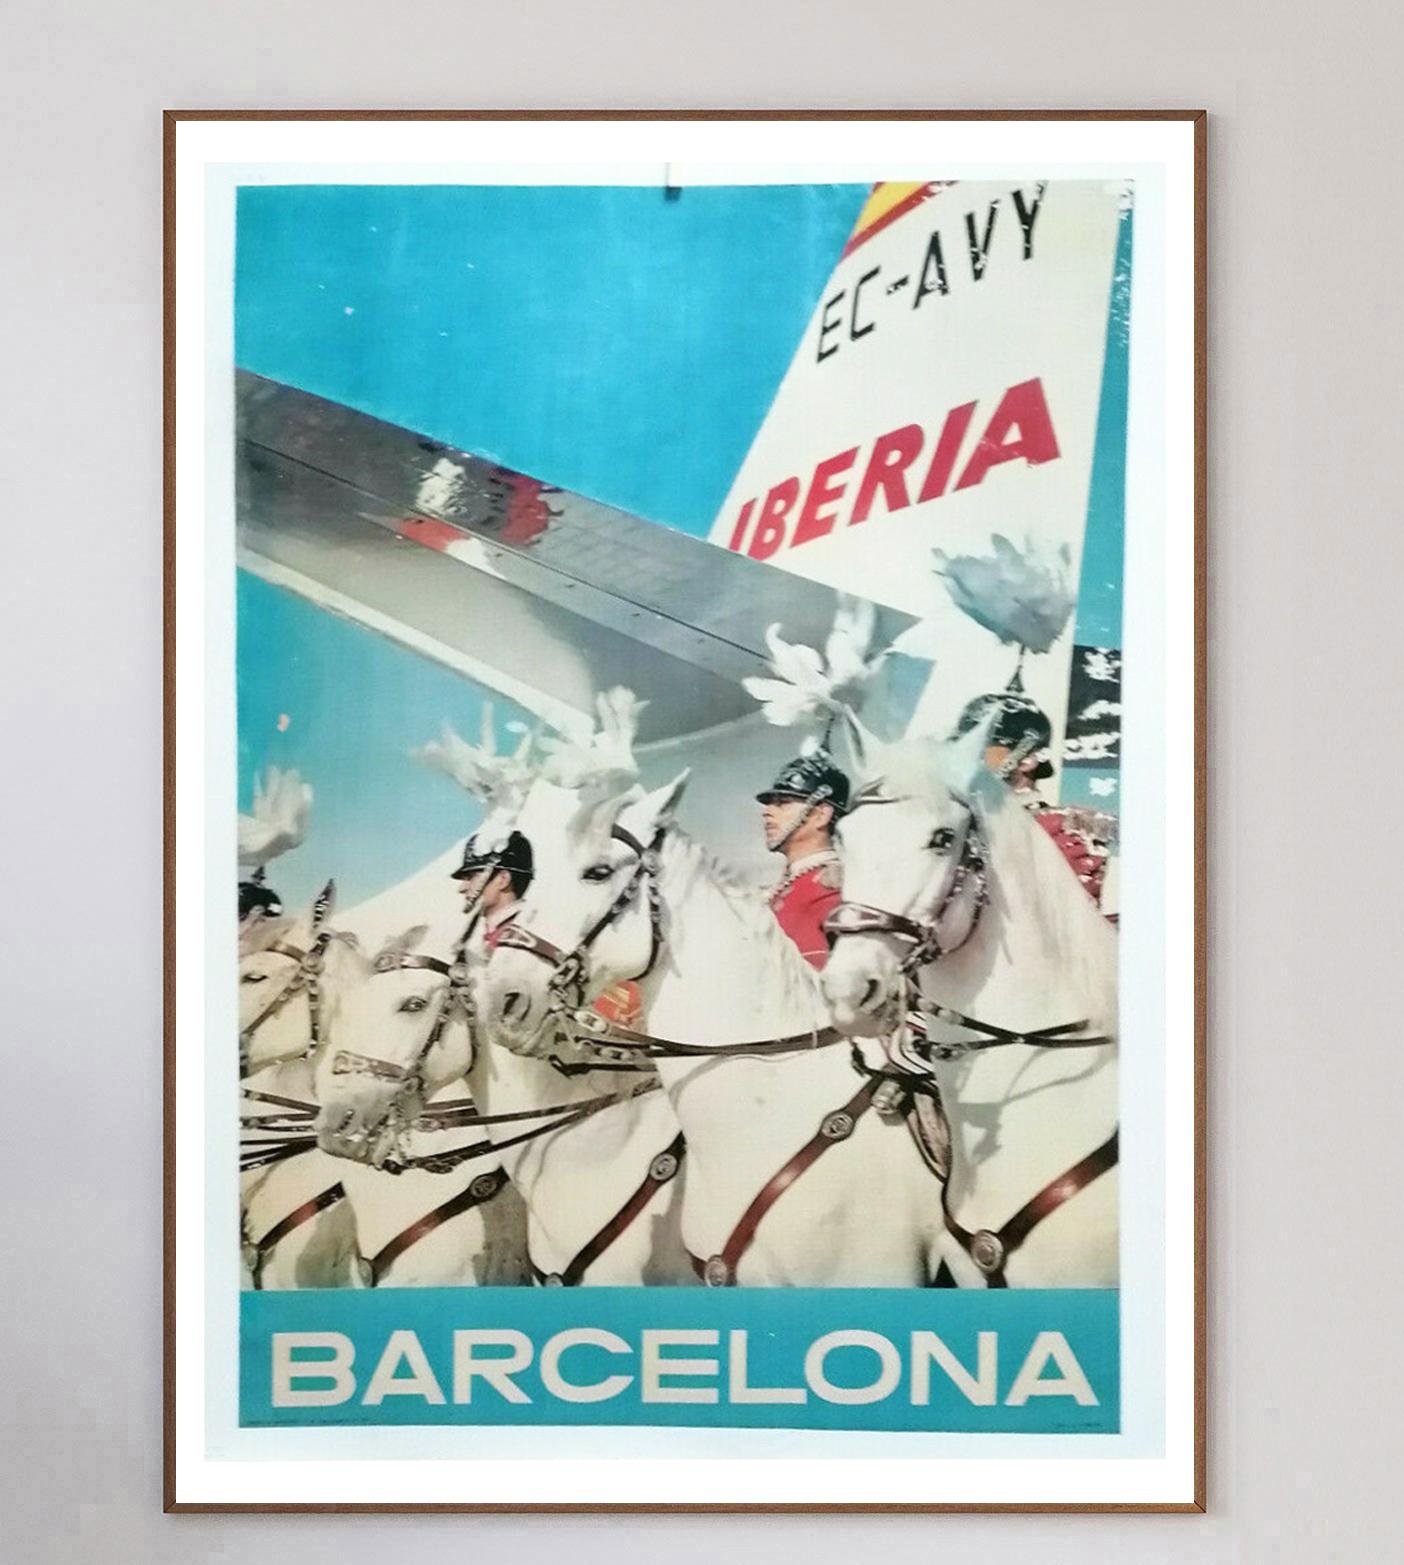 Beautiful poster from 1955 promoting Iberia airlines routes to Barcelona, Spain. The Spanish airline was founded in 1927 and continues strong to this day. With artwork depicting a sunny blue sky, Iberia plane and regal white horses, this attractive